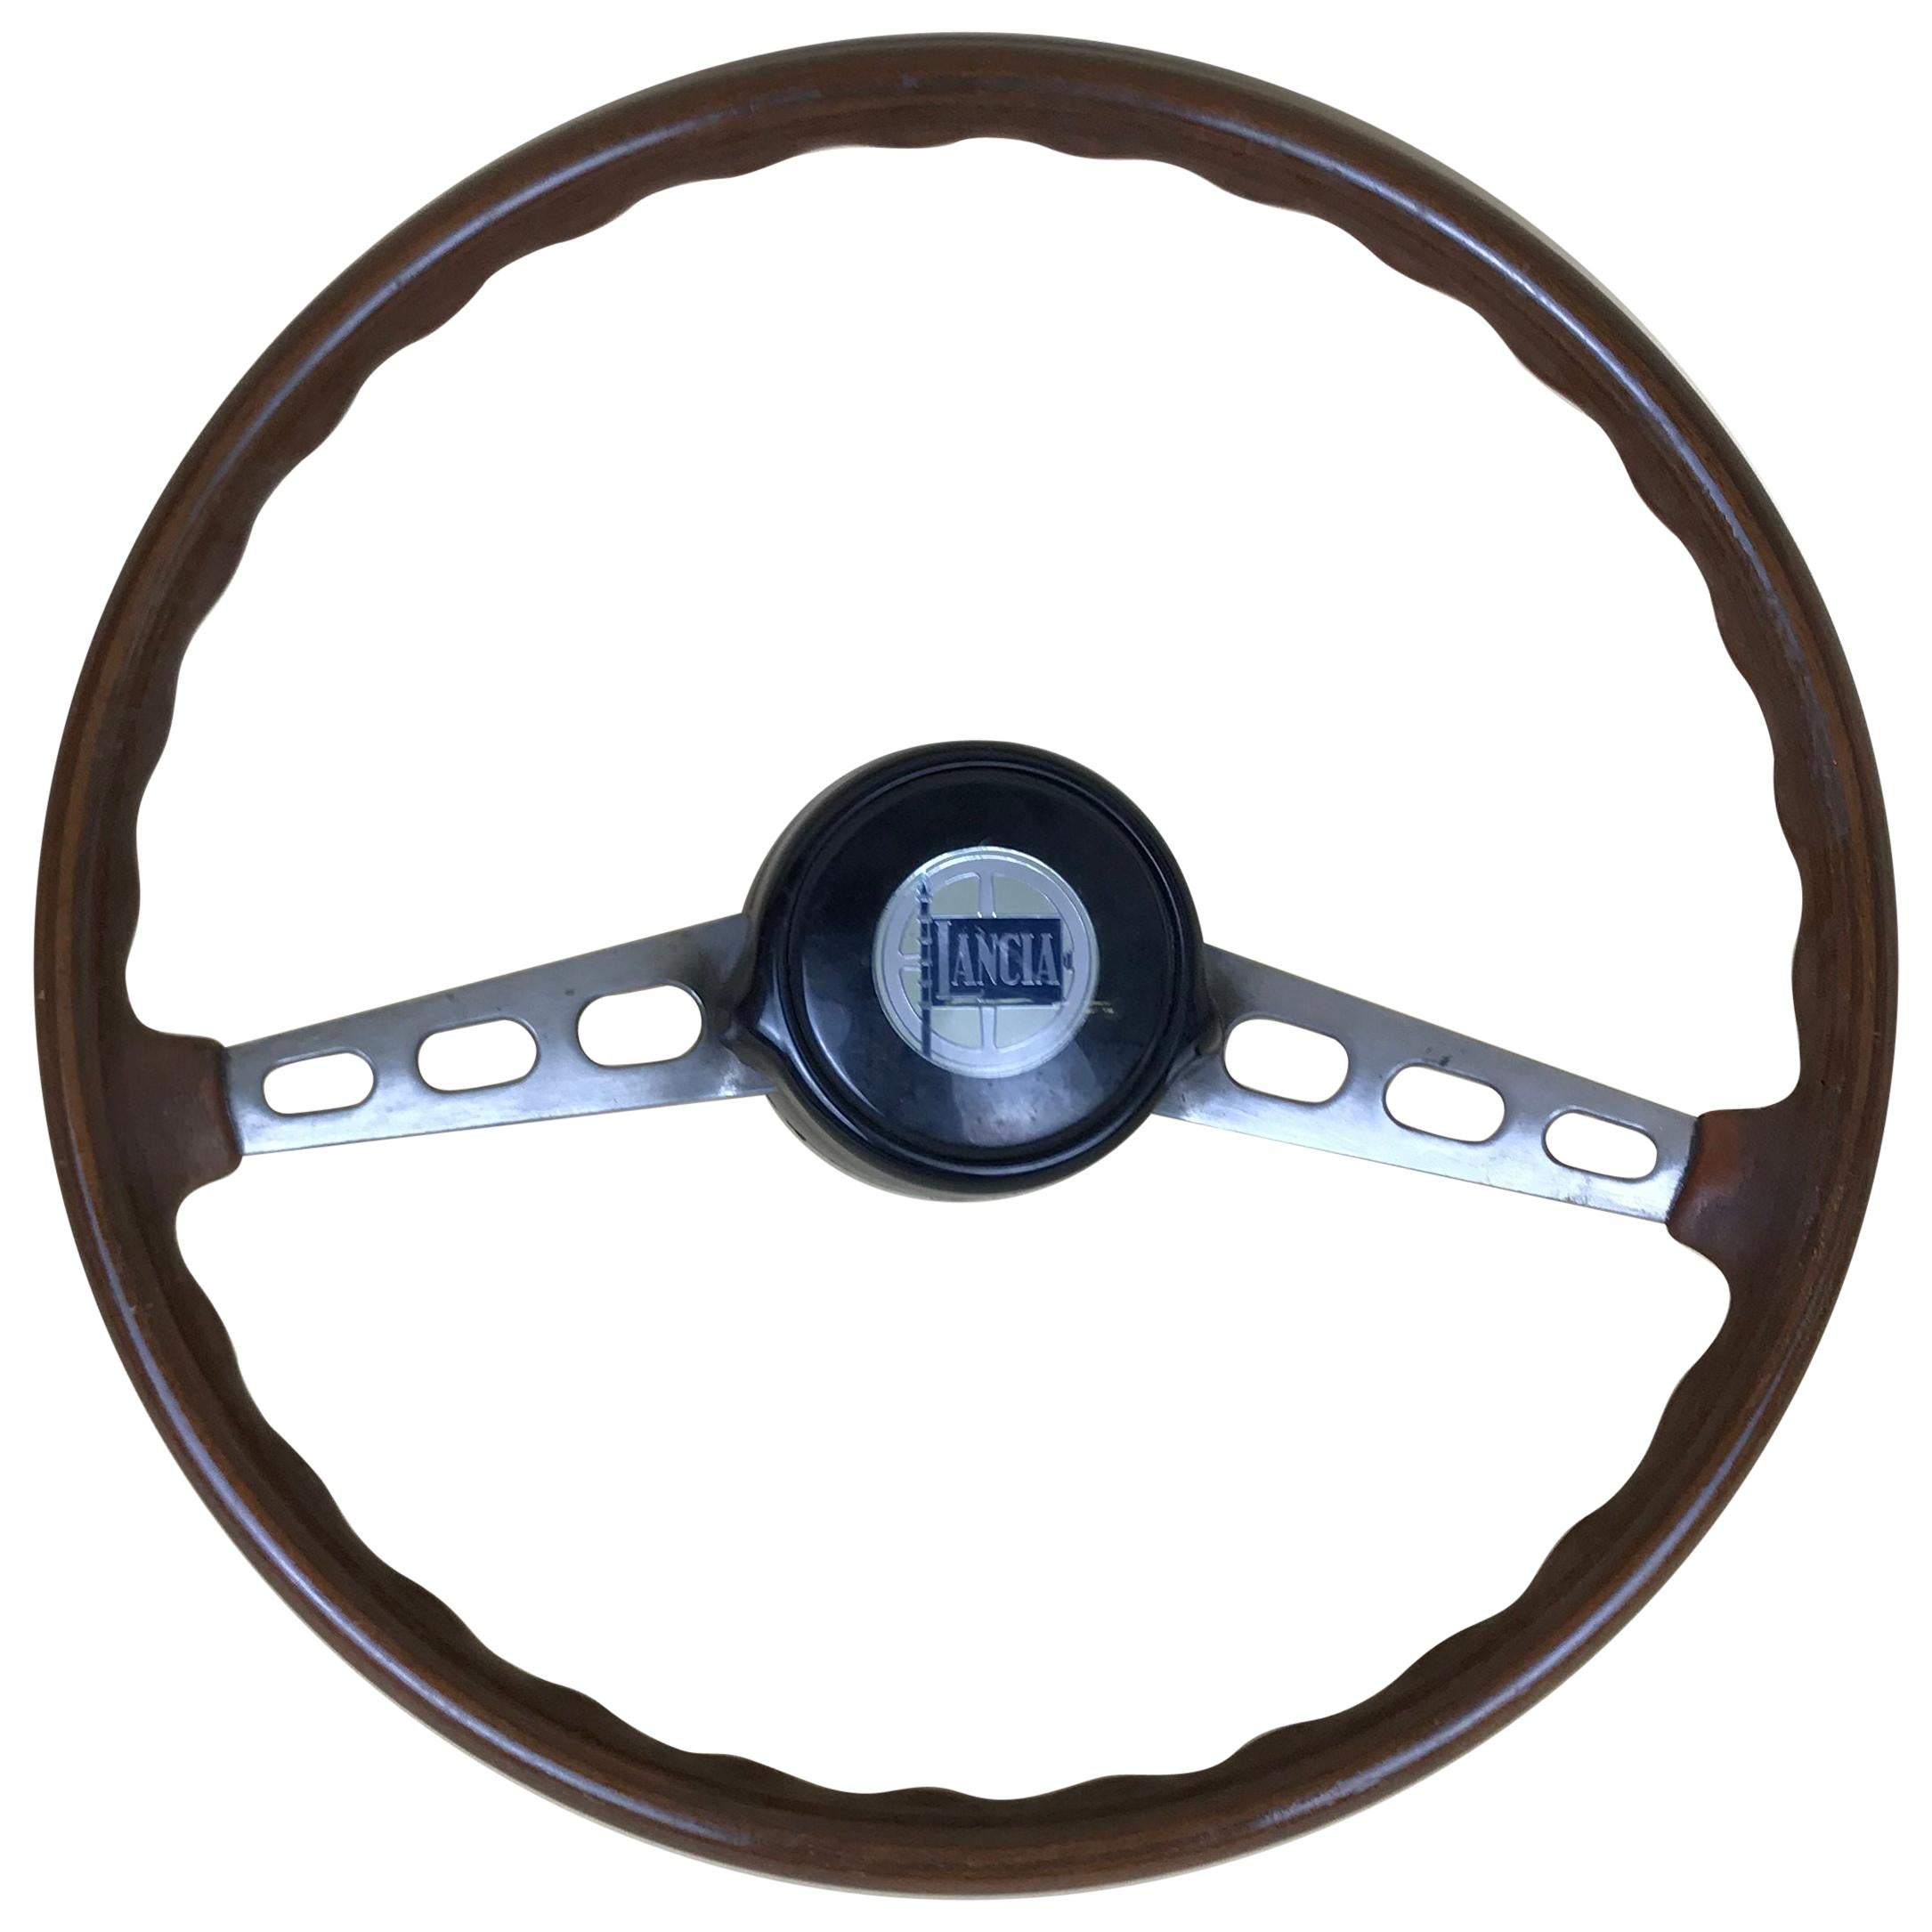 1960s Vintage Wooden and Metal Lancia Steering Wheel Made in Italy For Sale